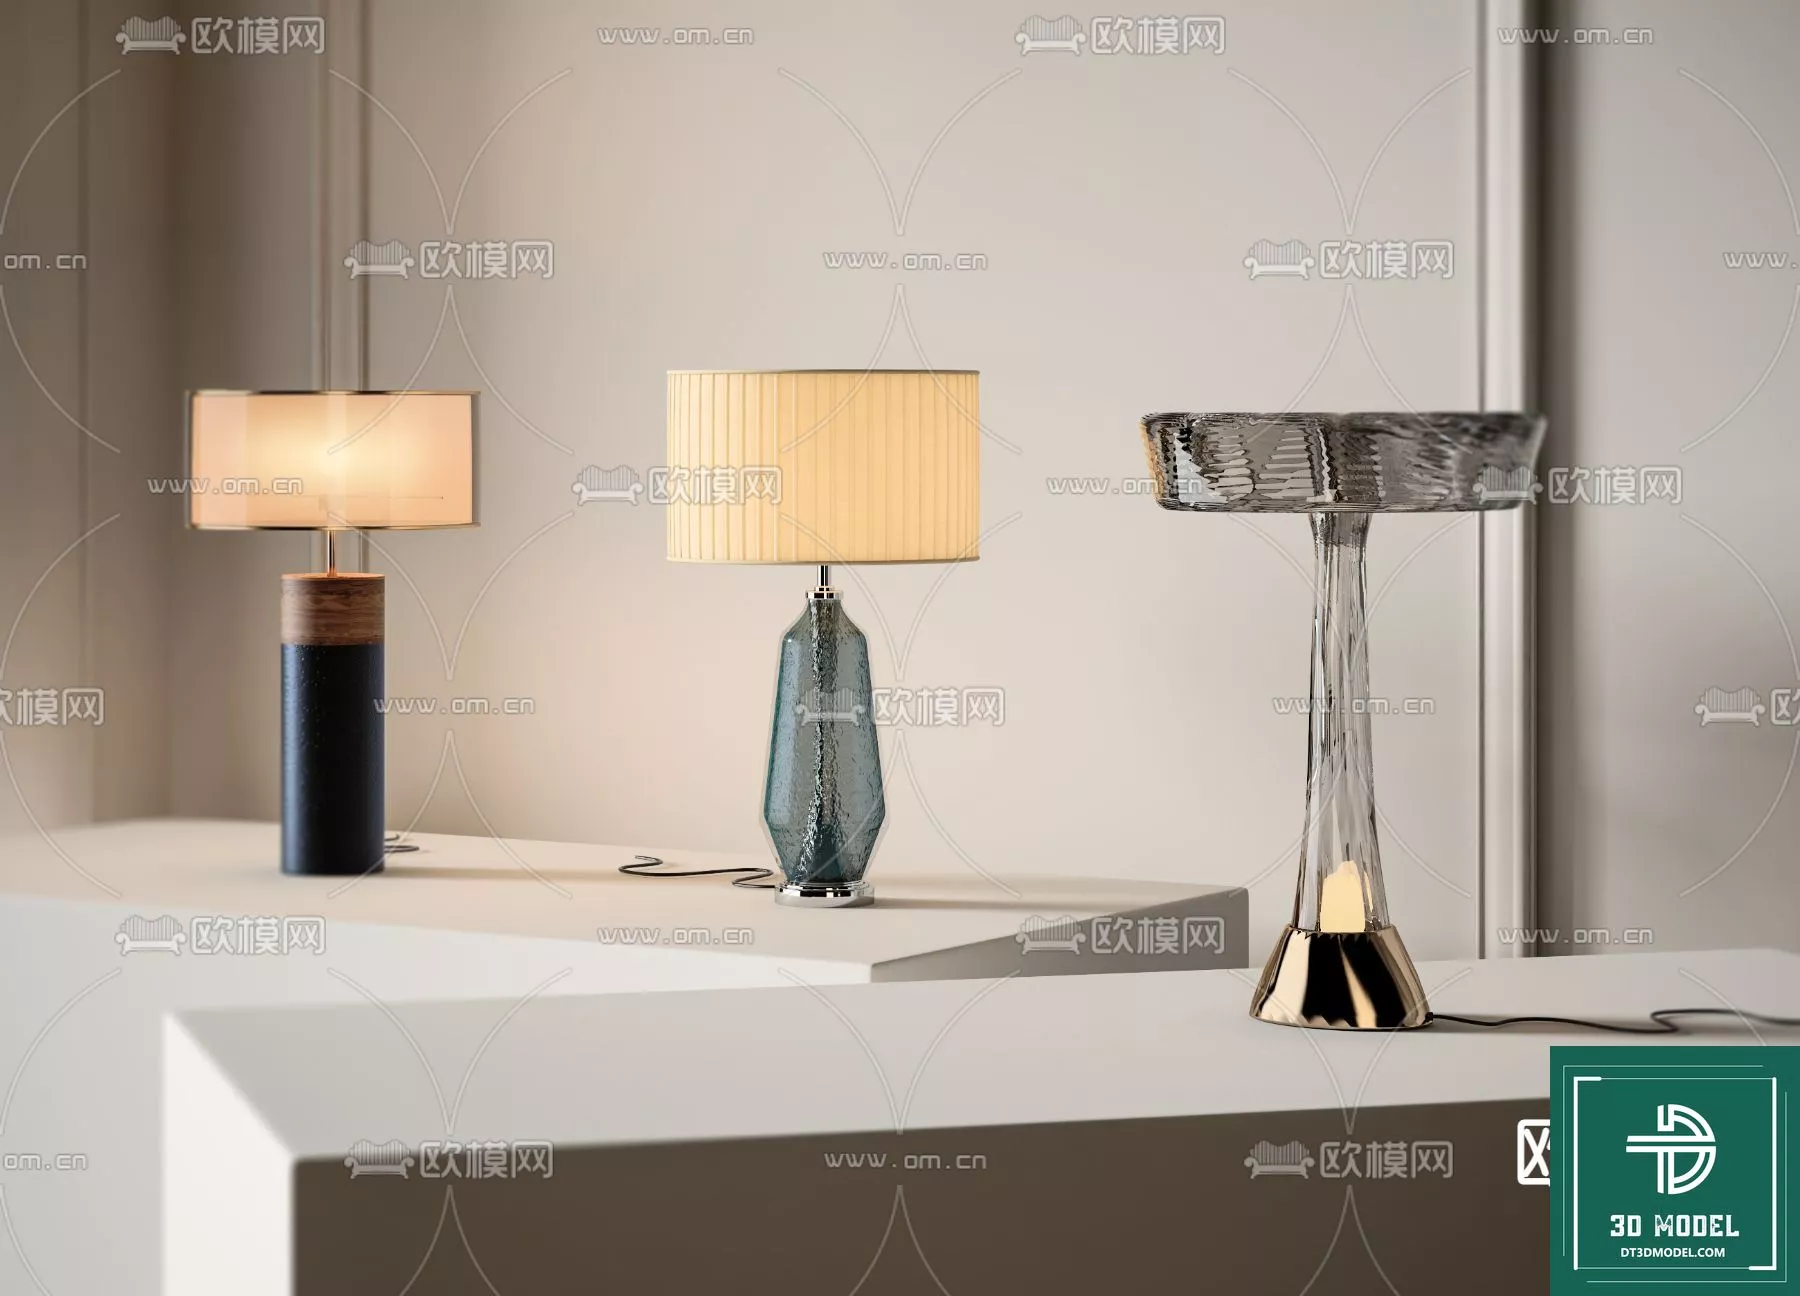 MODERN TABLE LAMP - SKETCHUP 3D MODEL - VRAY OR ENSCAPE - ID14484